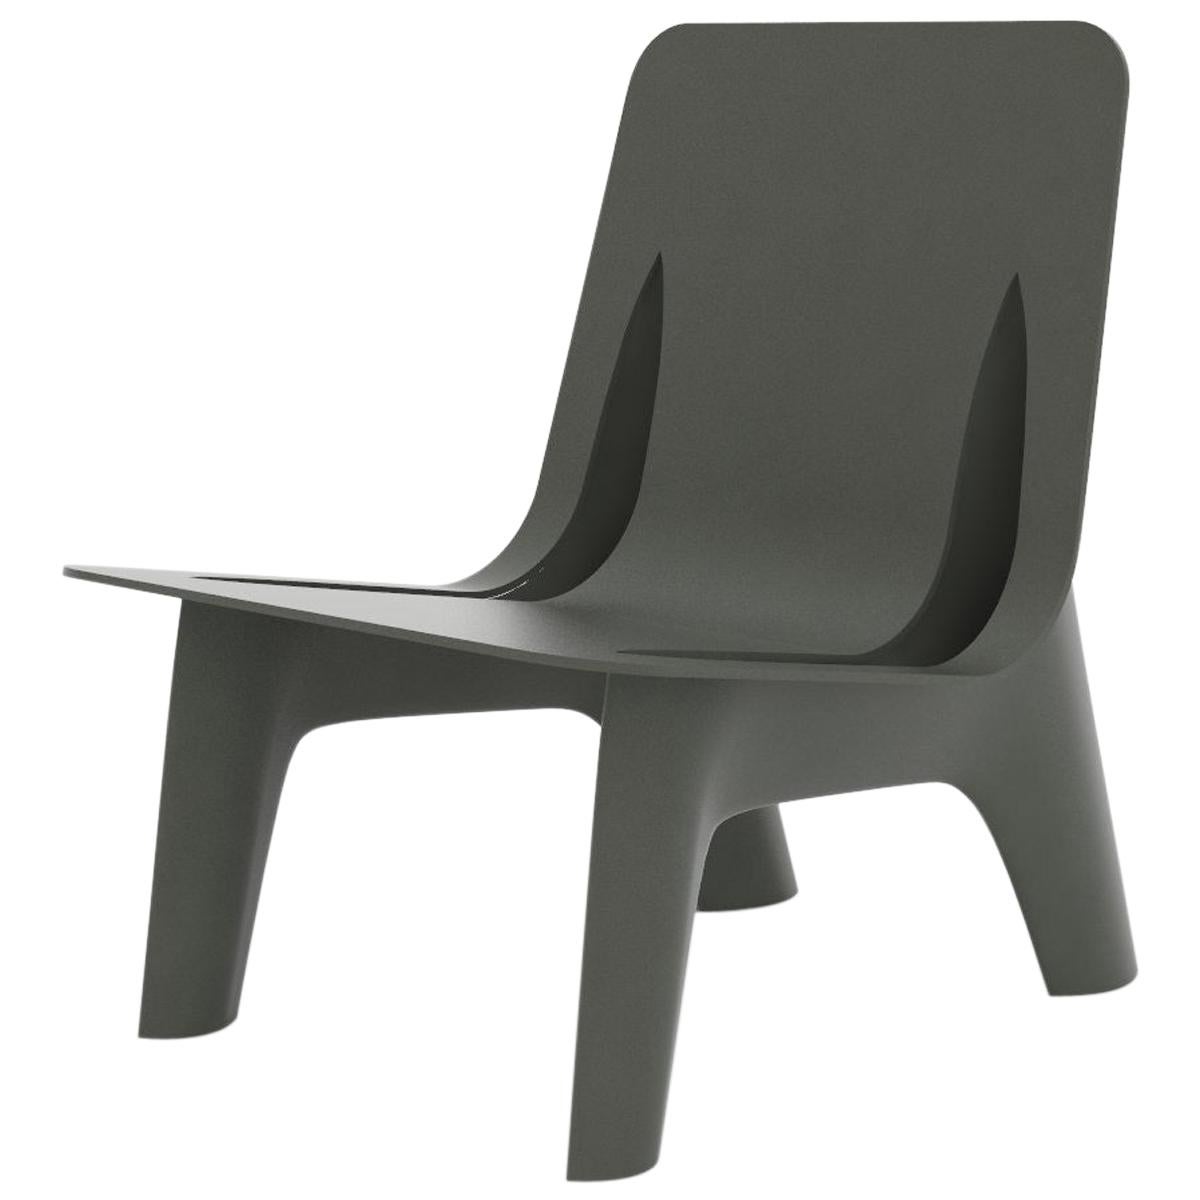 J-Chair Lounge Polished Umbra Grey Color Carbon Steel Seating by Zieta For Sale